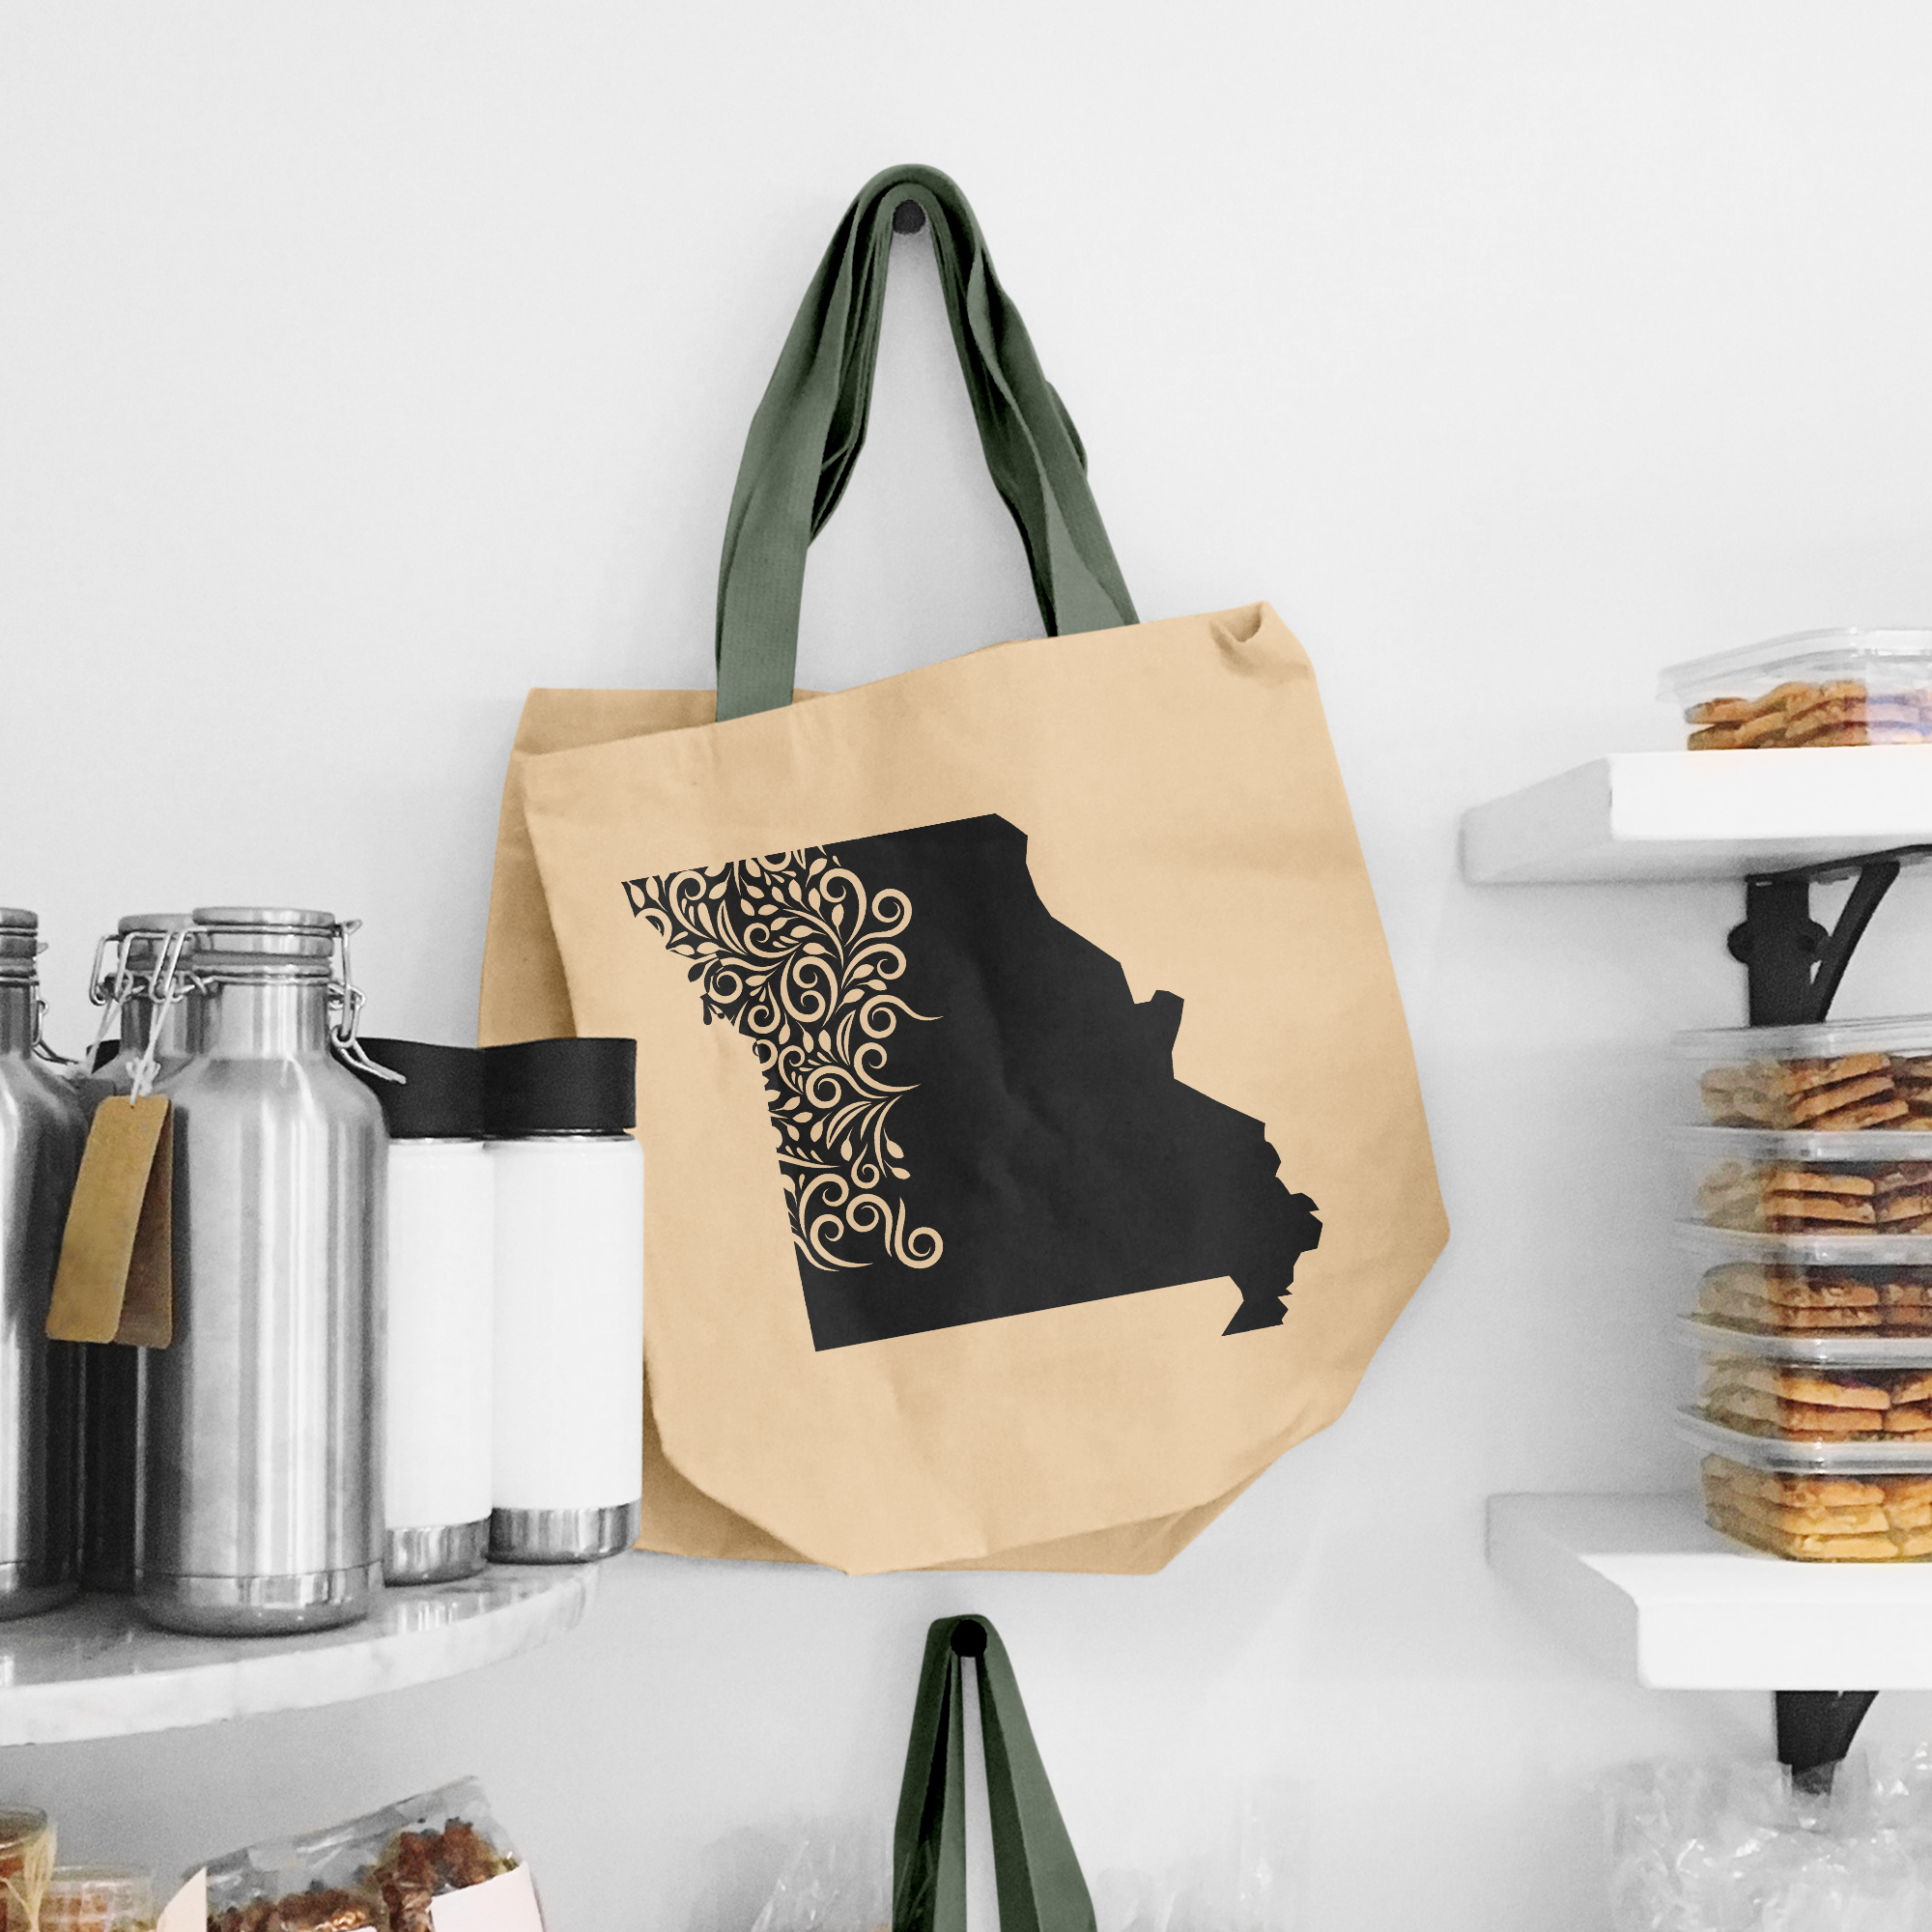 Black illustration of map of Missouri on the beige shopping bag with dirty green handle.